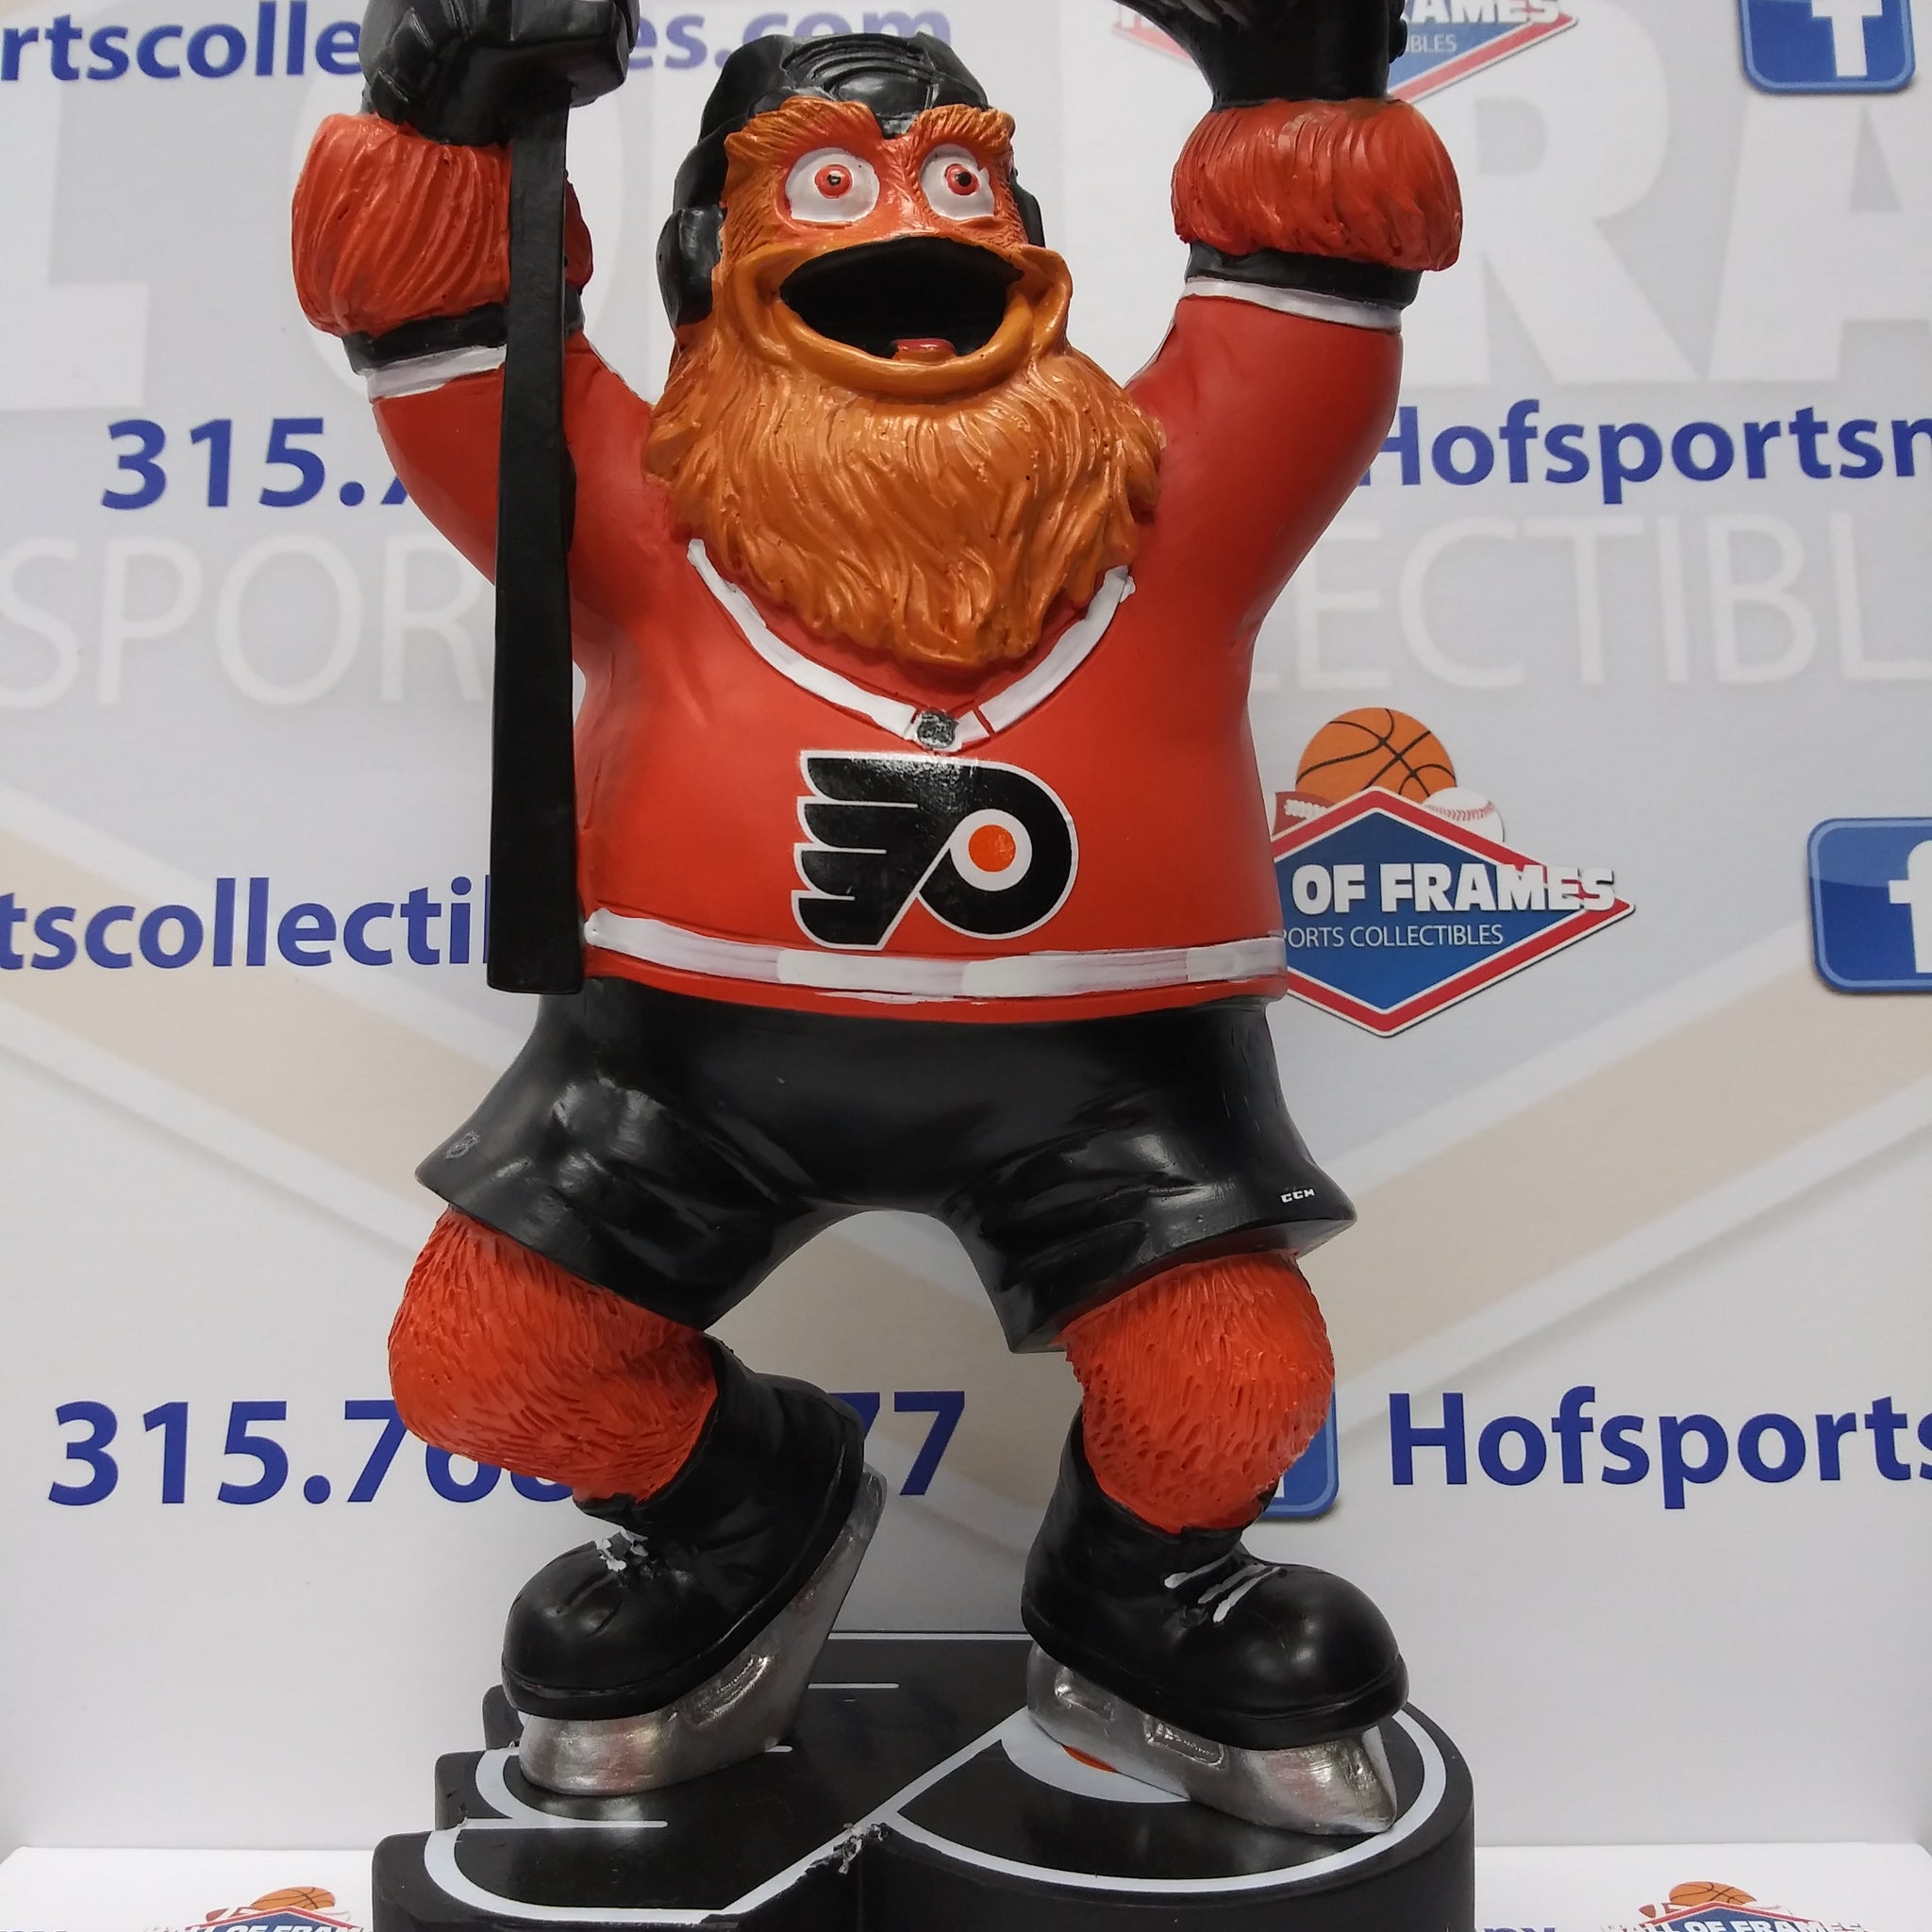 FOCO LIMITED EDITION HANDCRAFTED PHILADELPHIA FLYERS "GRITTY" MASCOT STATUE!